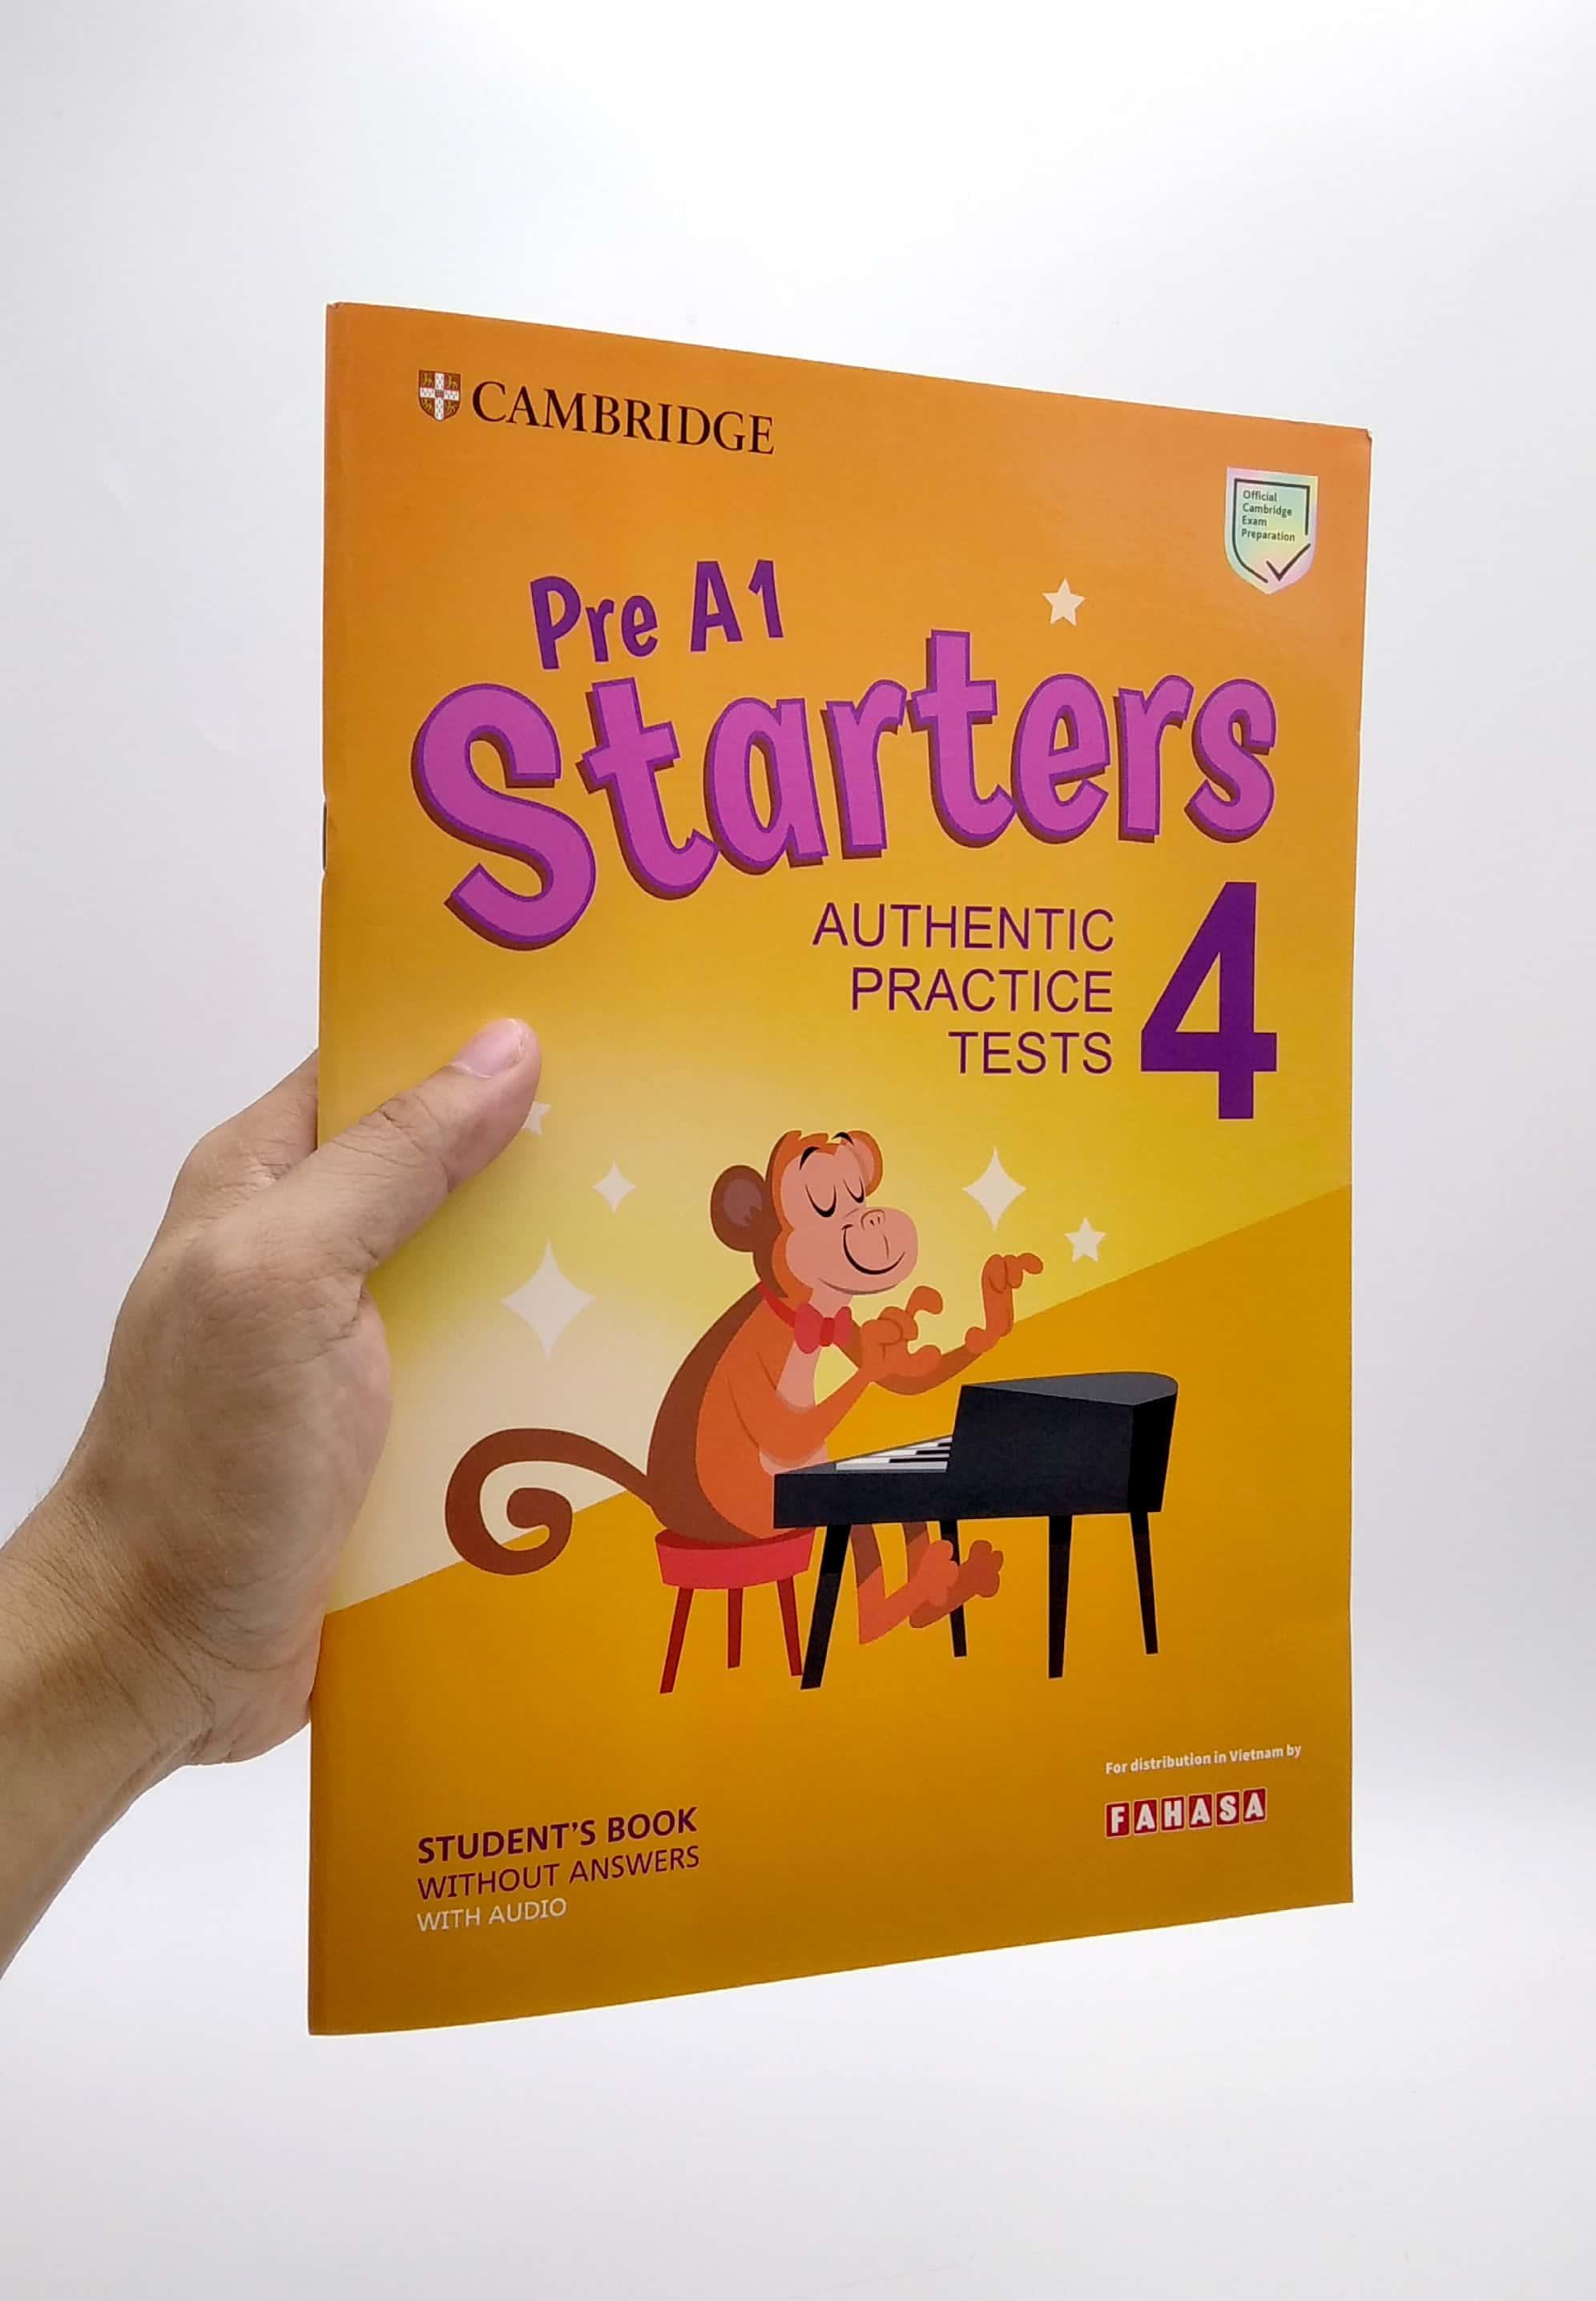 Pre A1 Starters 4 Authentic Practice Tests: Student's Book Without Answers With Audio - FAHASA Reprint Edition